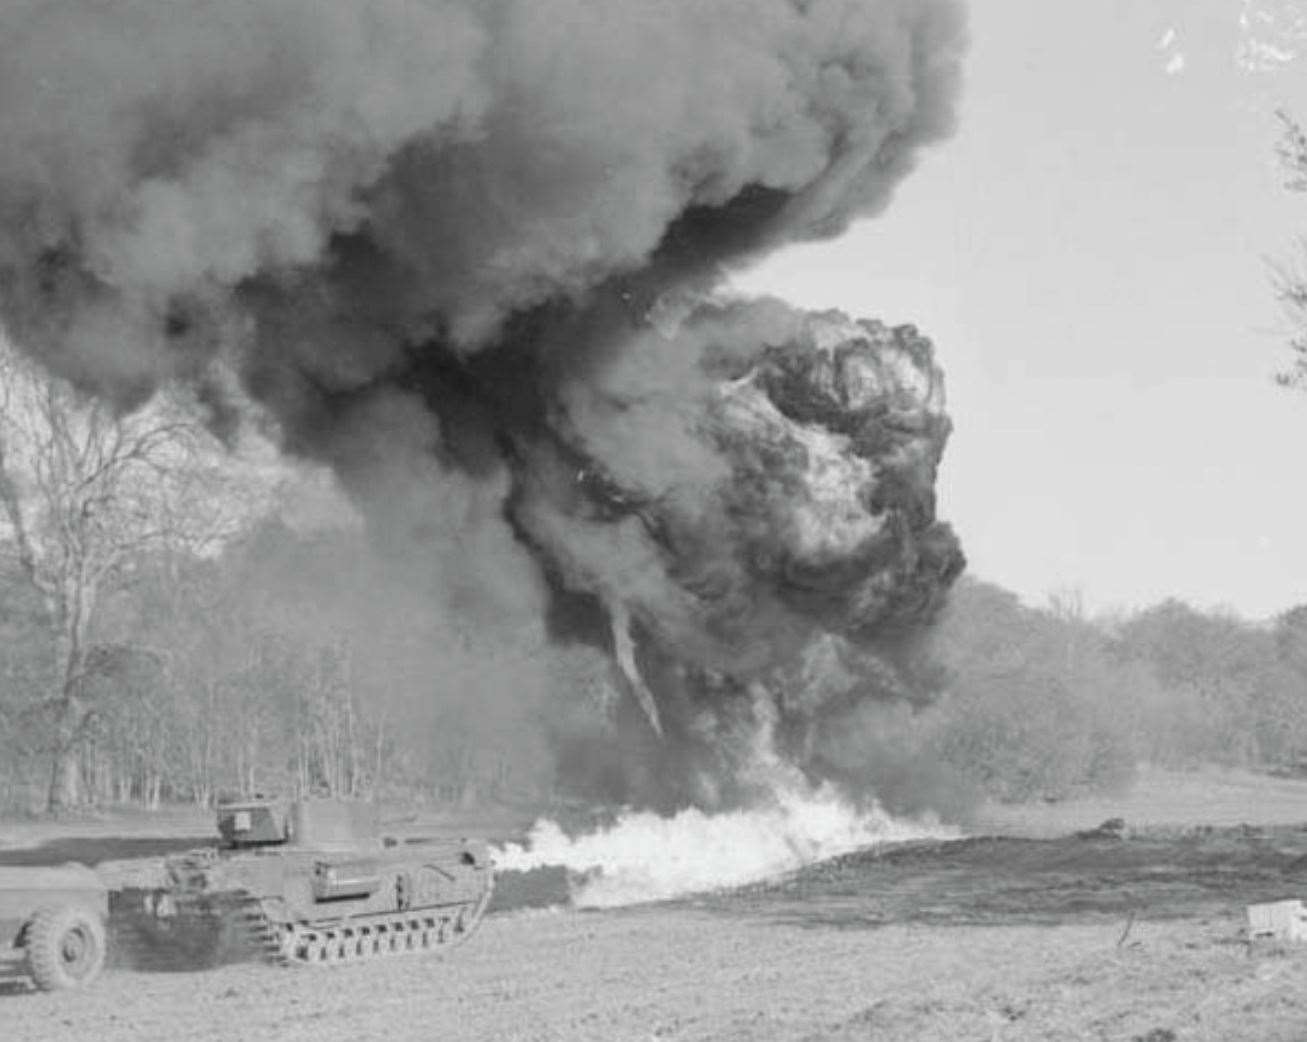 Flame-throwing tanks were tested at Eastwell in the Second World War